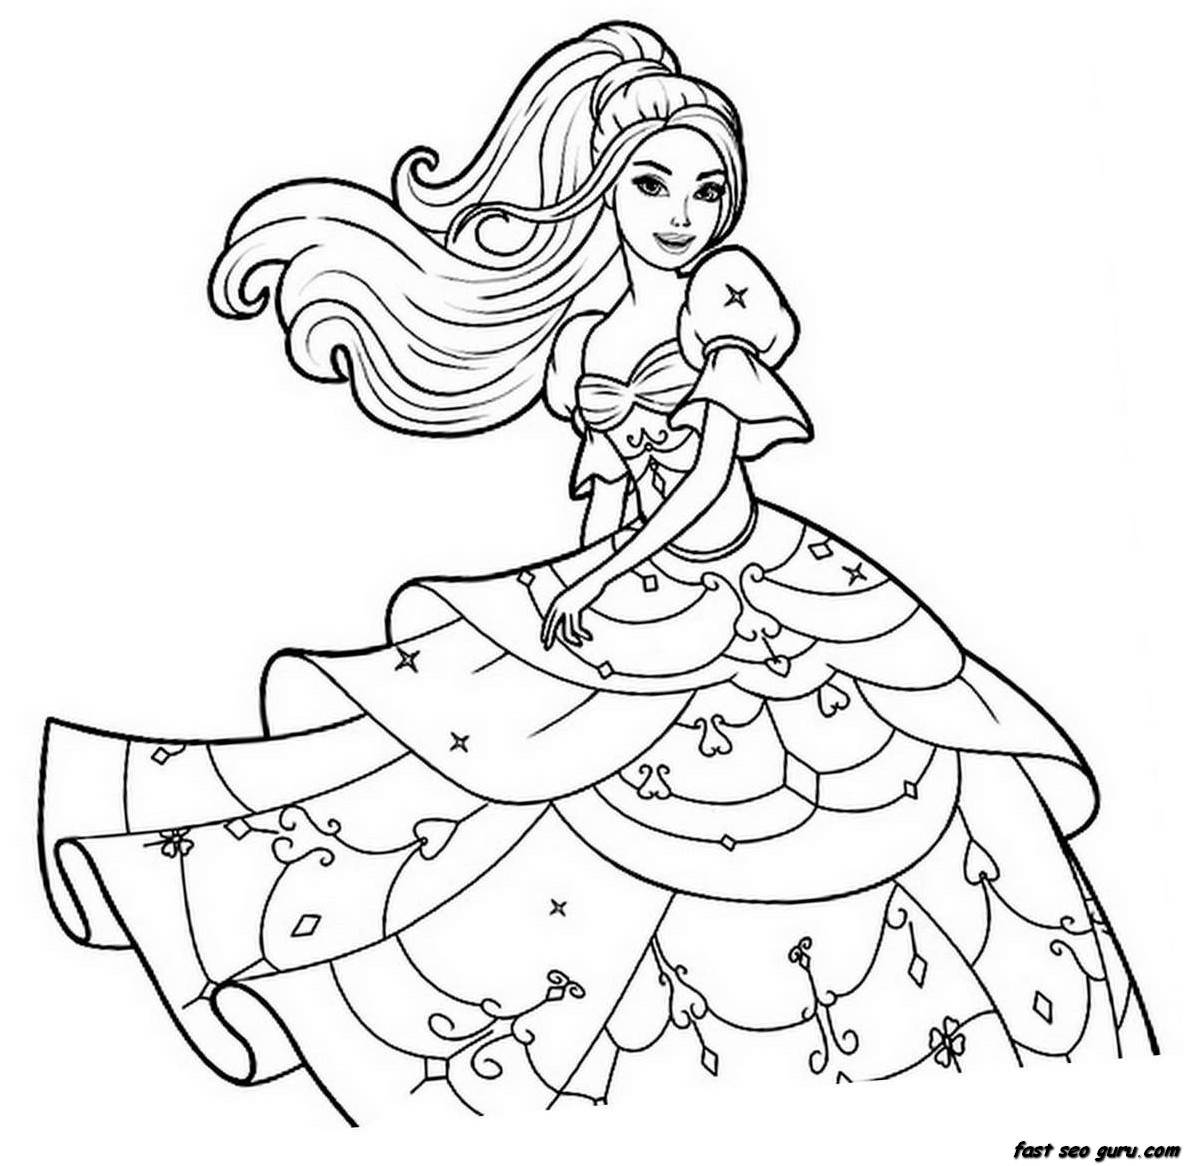 Coloring Sheets For Girls 9